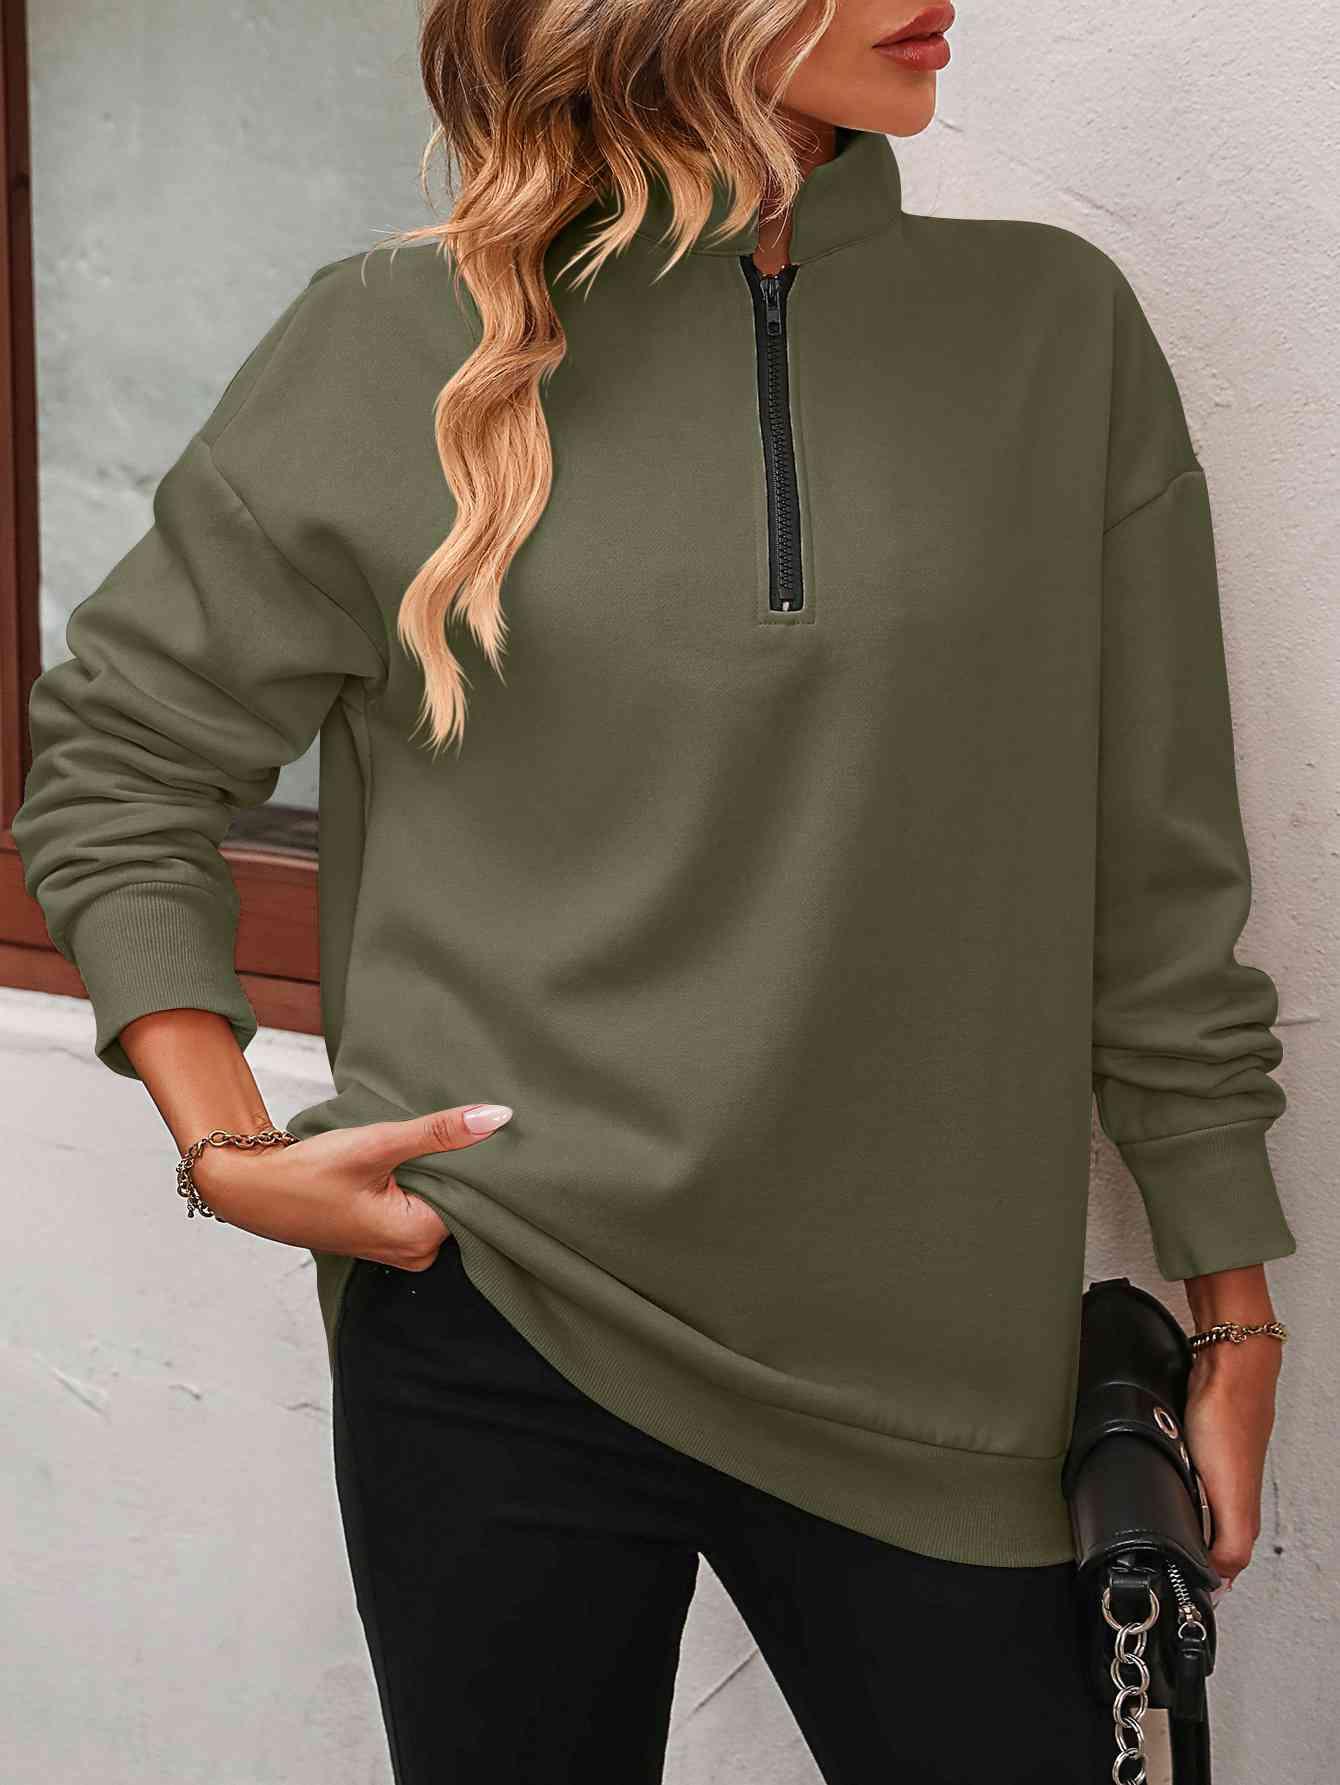 Zip-Up Dropped Shoulder Sweatshirt in 7 colors - Olive Ave